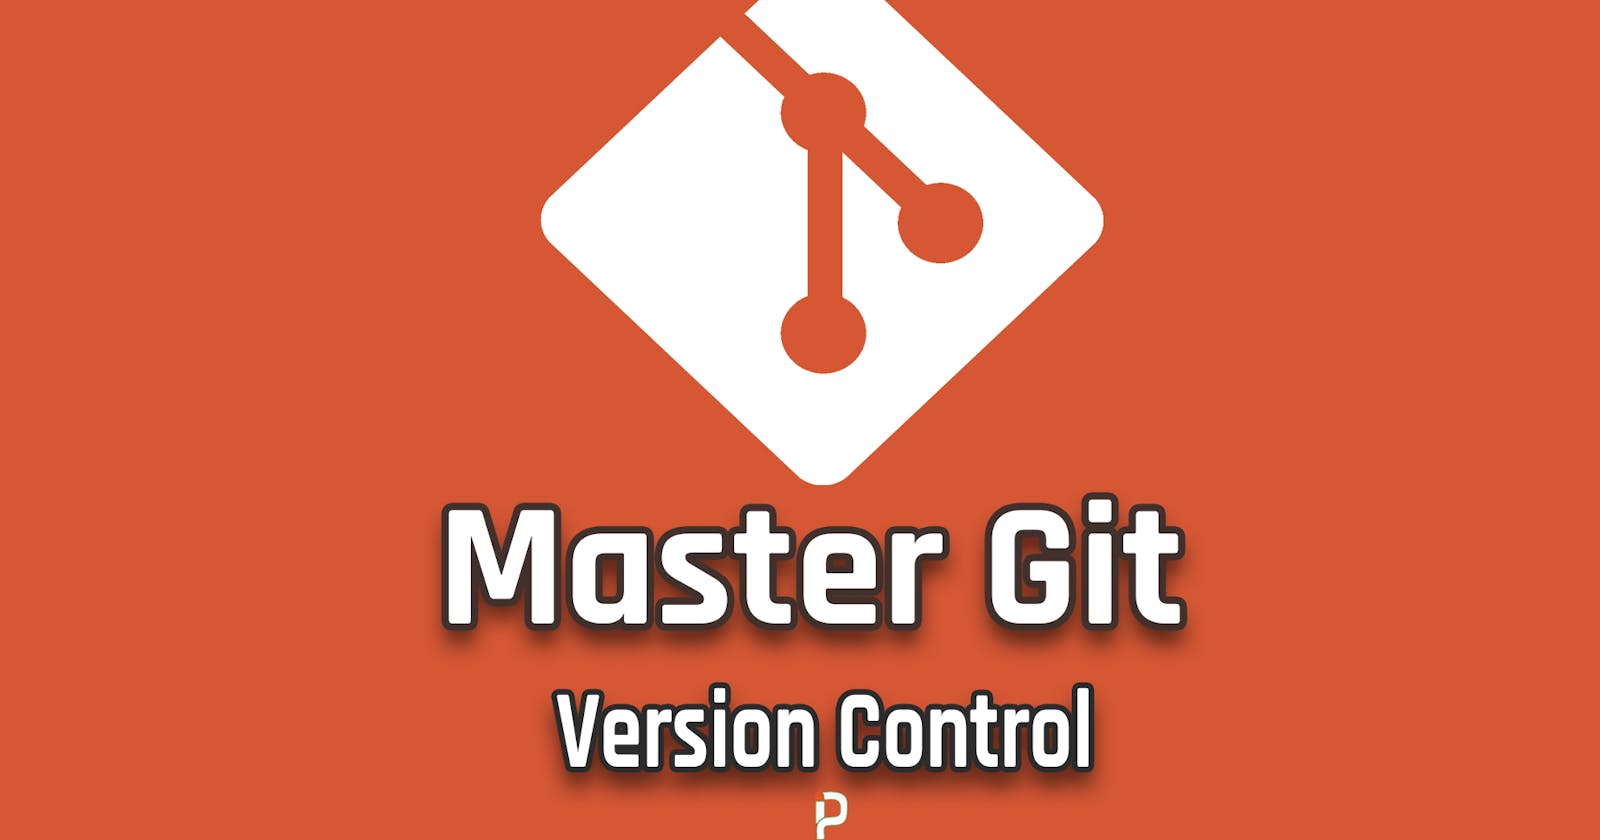 Master Git (Version Control) in One Video From Scratch